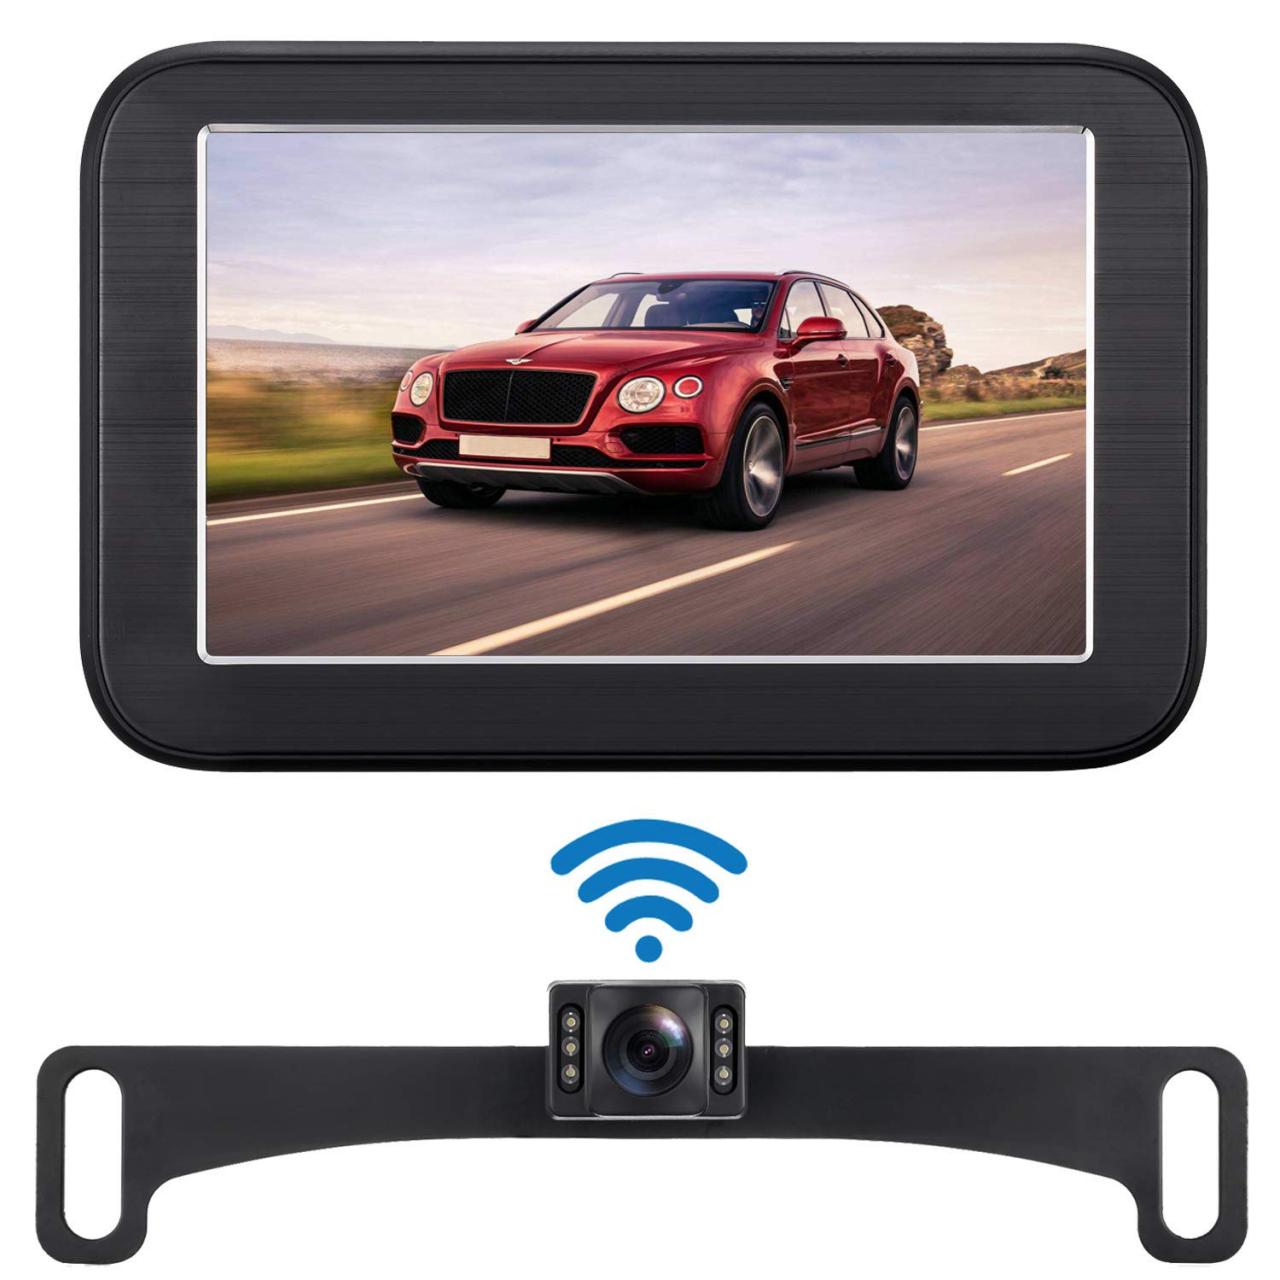 save up to 70% iStrong Backup Camera Wireless 5'' Monitor Kit for  Car/SUV/Minivan Waterproof License Plate Rear View Camera with 6 White LED  Night Vision Guide Lines ON/Off: Car Electronics discount -www.ust.edu